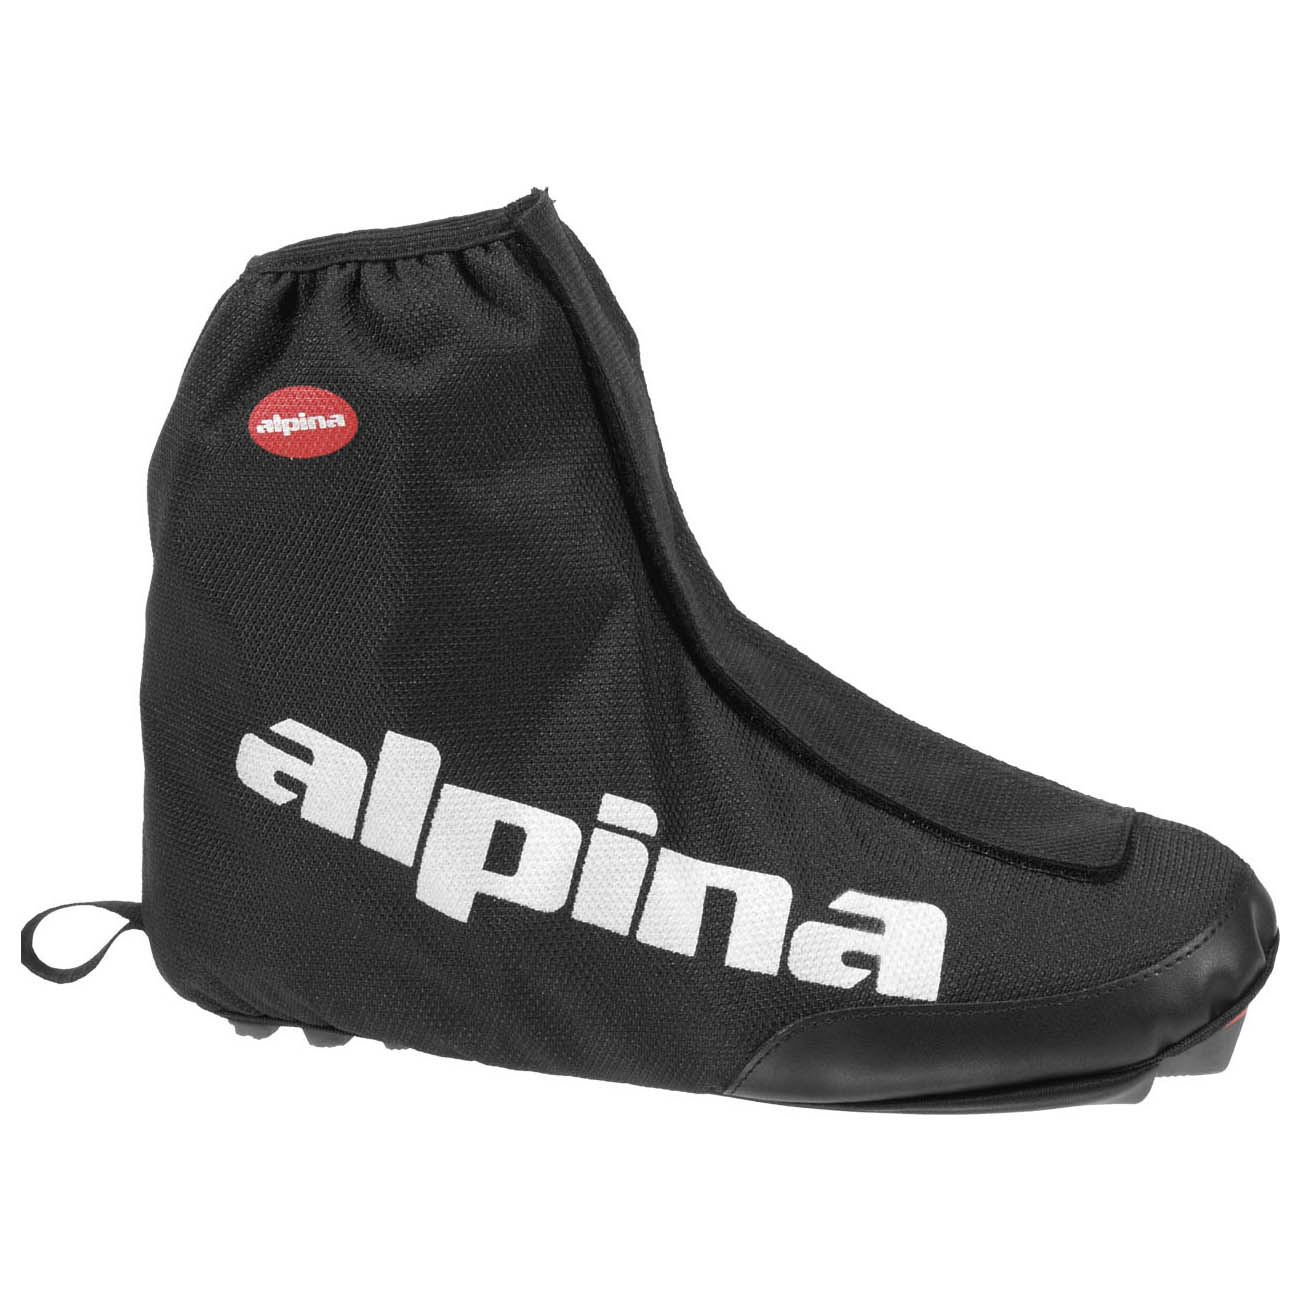 Alpina Overboot BC Lined Black